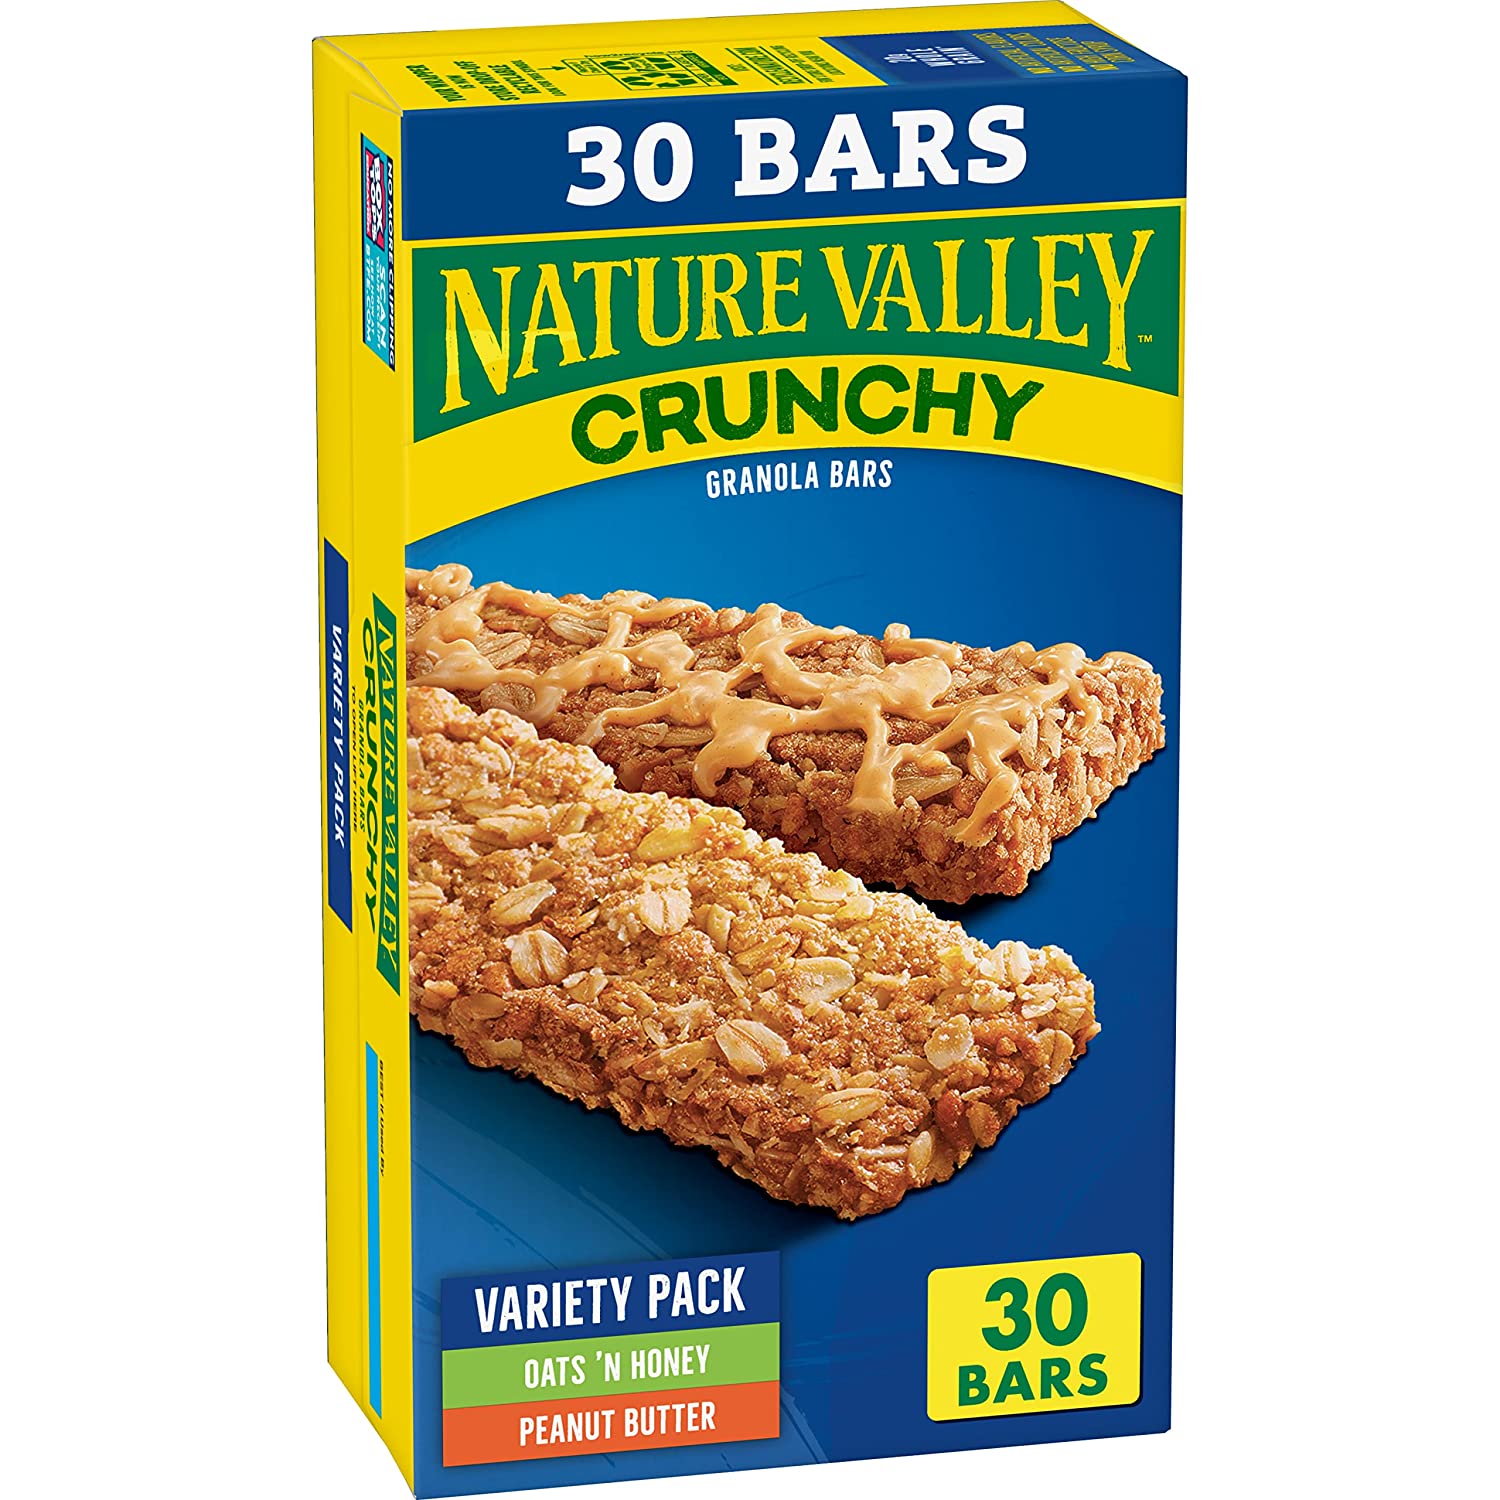 75-Count 1.49-Oz Nature Valley Crunchy Granola Bars (Oats 'n Honey & Peanut Butter) $18.66 & More w/ S&S + Free Shipping